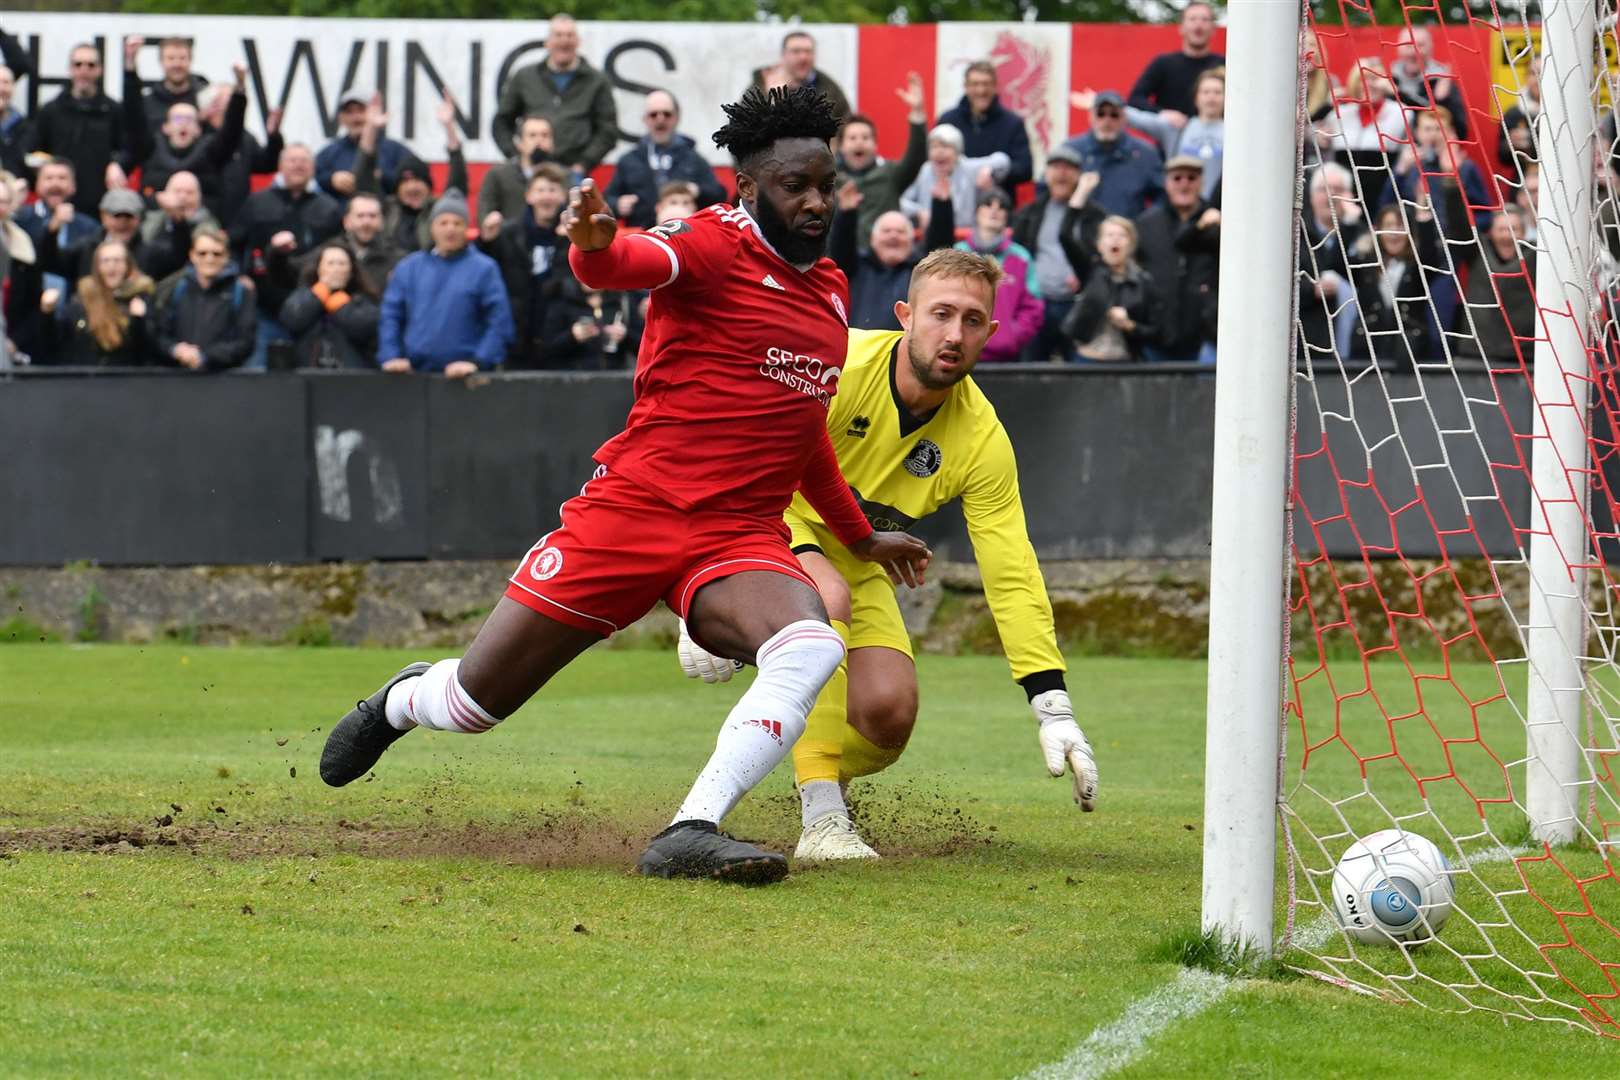 Welling score their second goal against Chelmsford. Picture: Keith Gillard